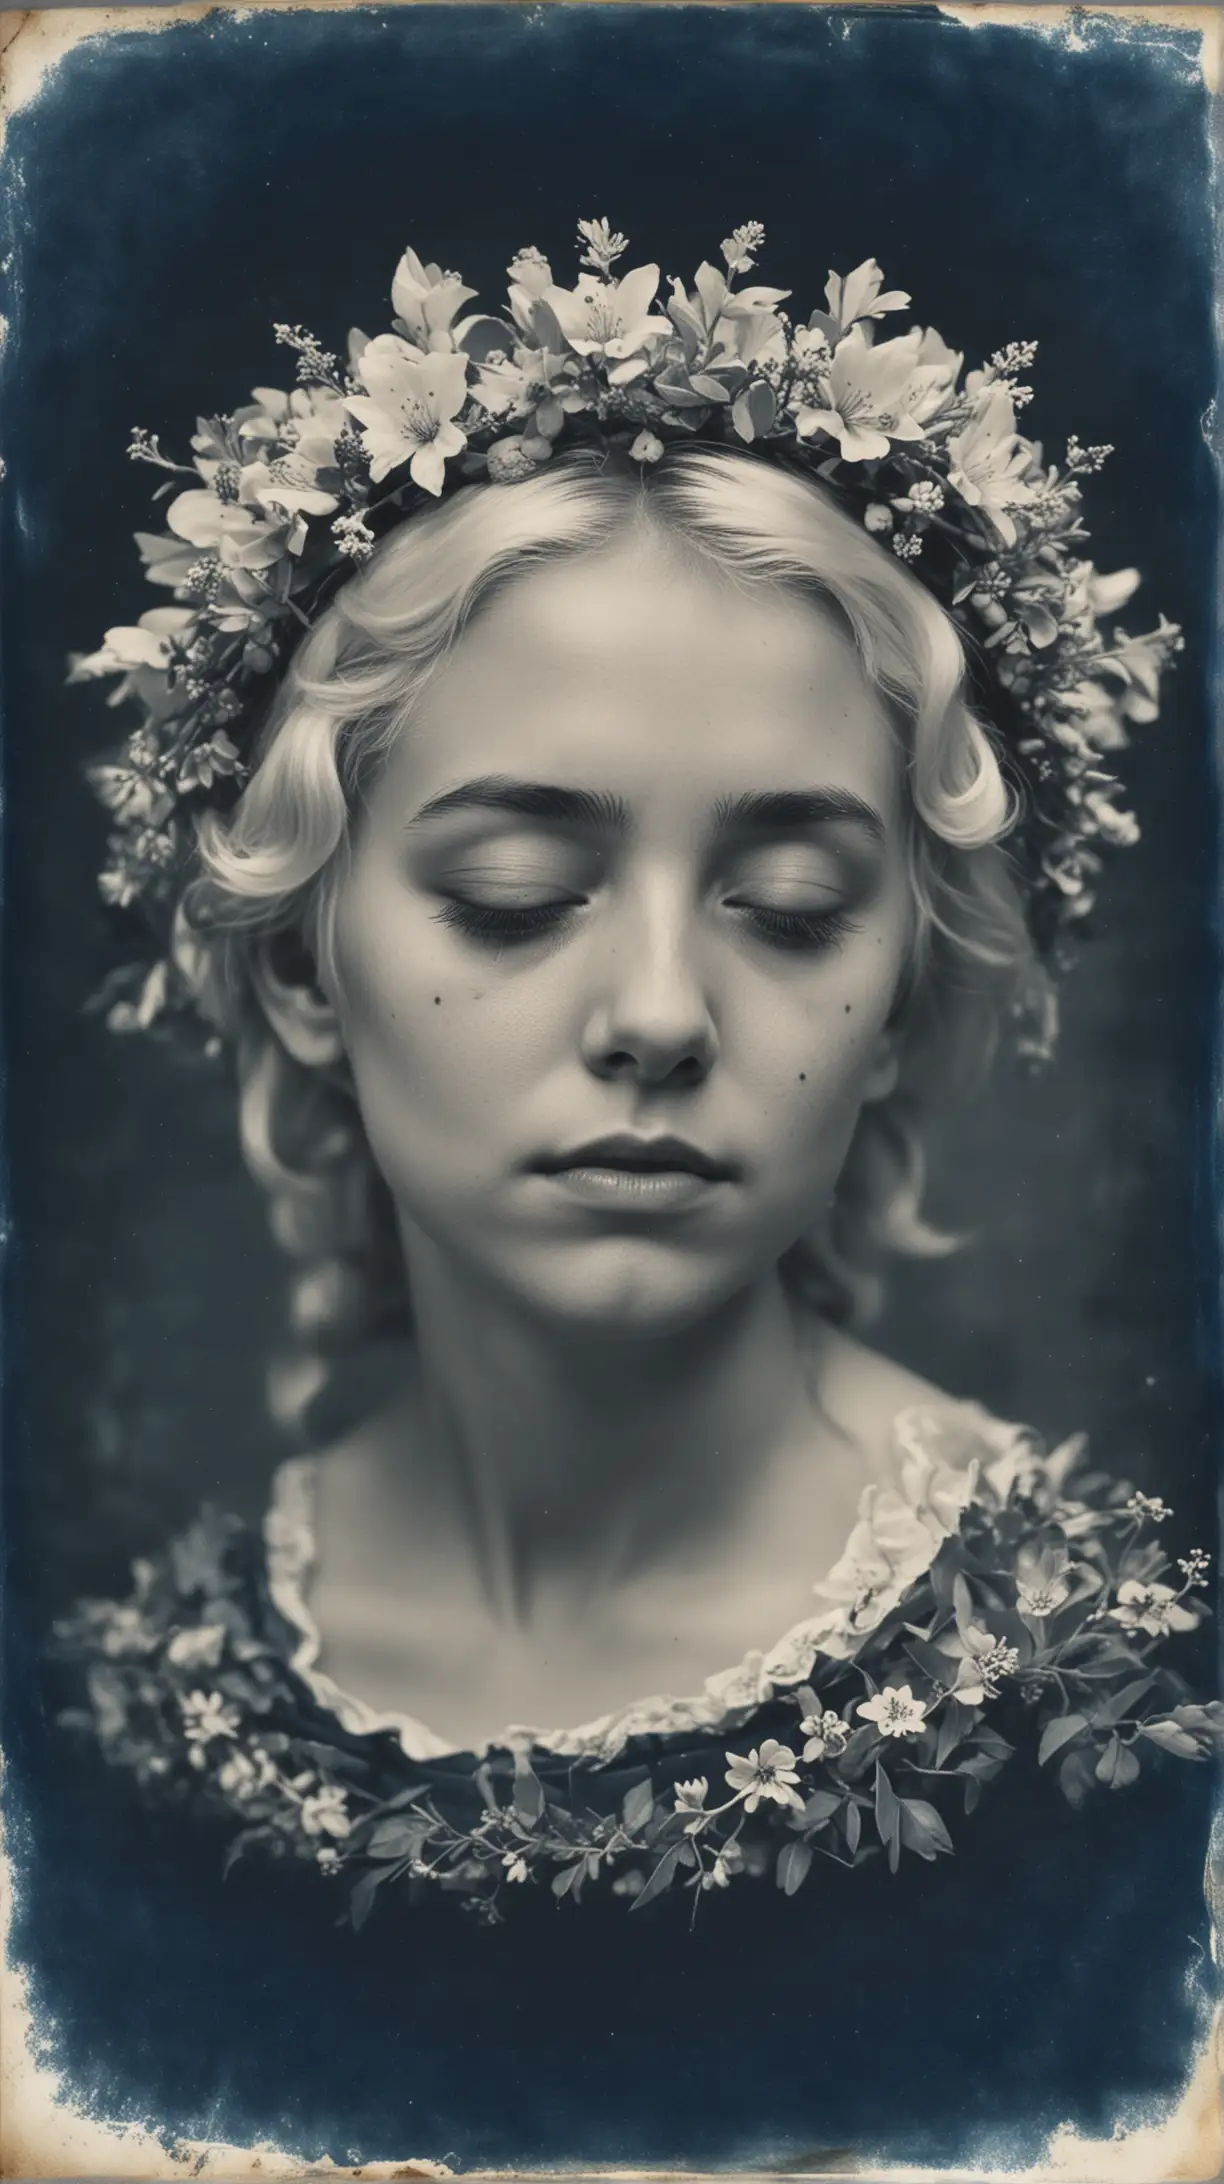 Young Woman with White Hair and Flower Wreath Deep in Thought Portrait